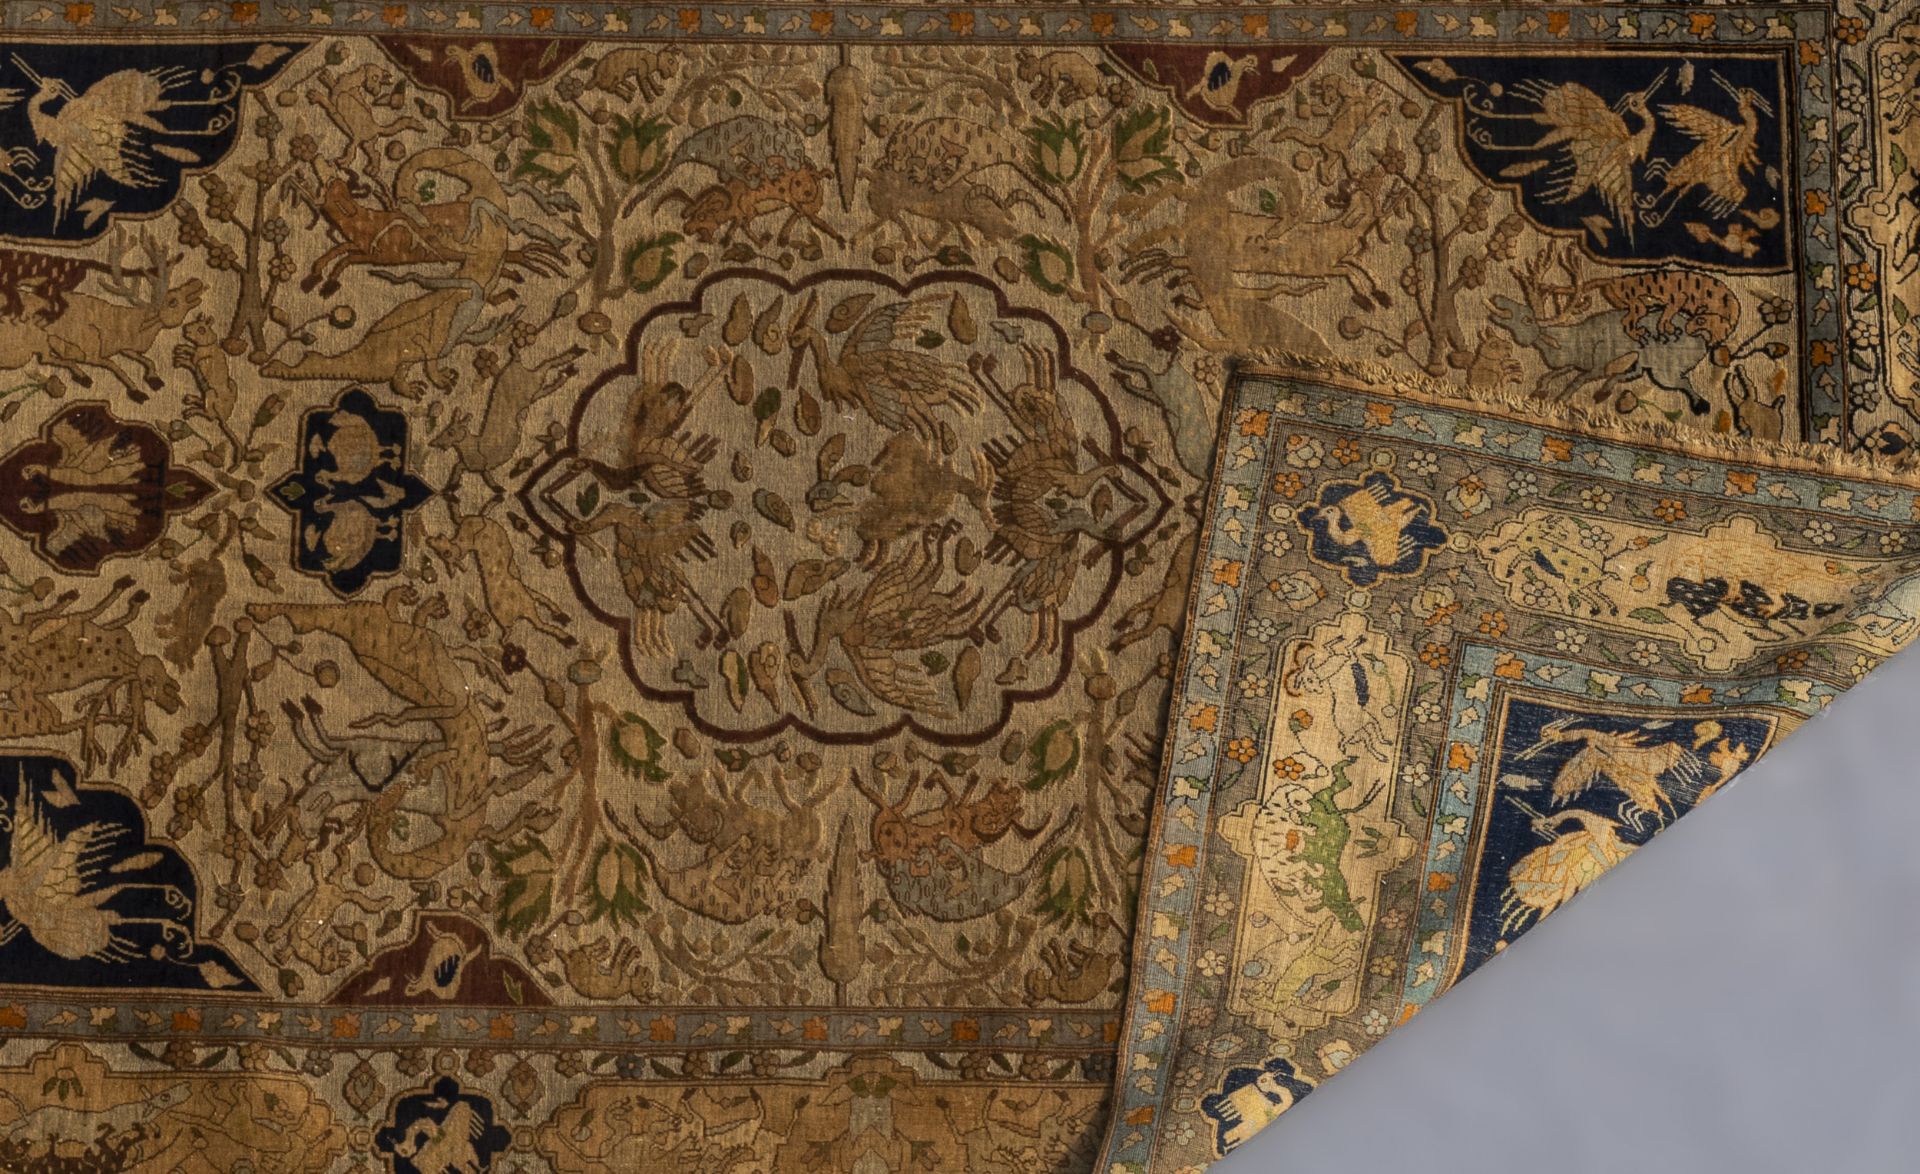 A lavish Oriental rug with animals and floral design, silk and gold thread on cotton, 19th C. - Image 4 of 4